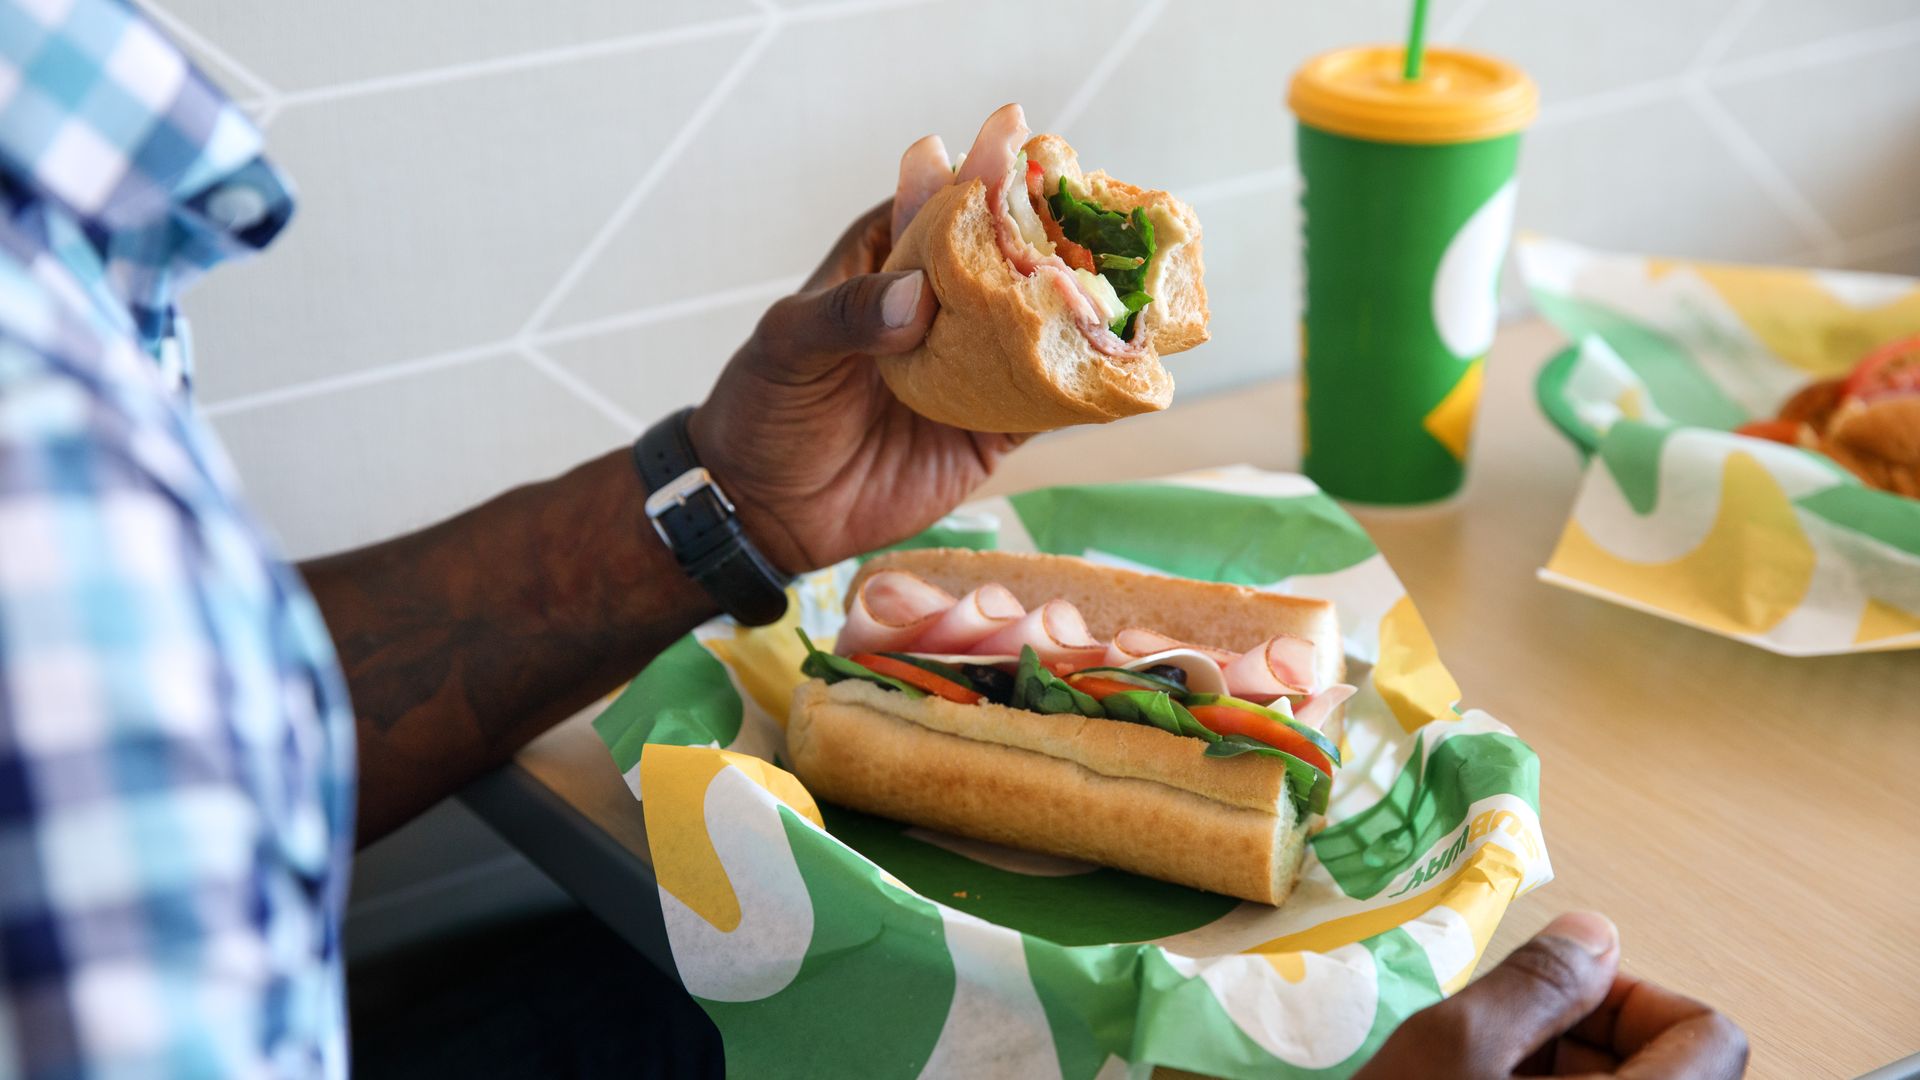 Hands holding half of a sandwich and the other half on a wrapper. Cup in background